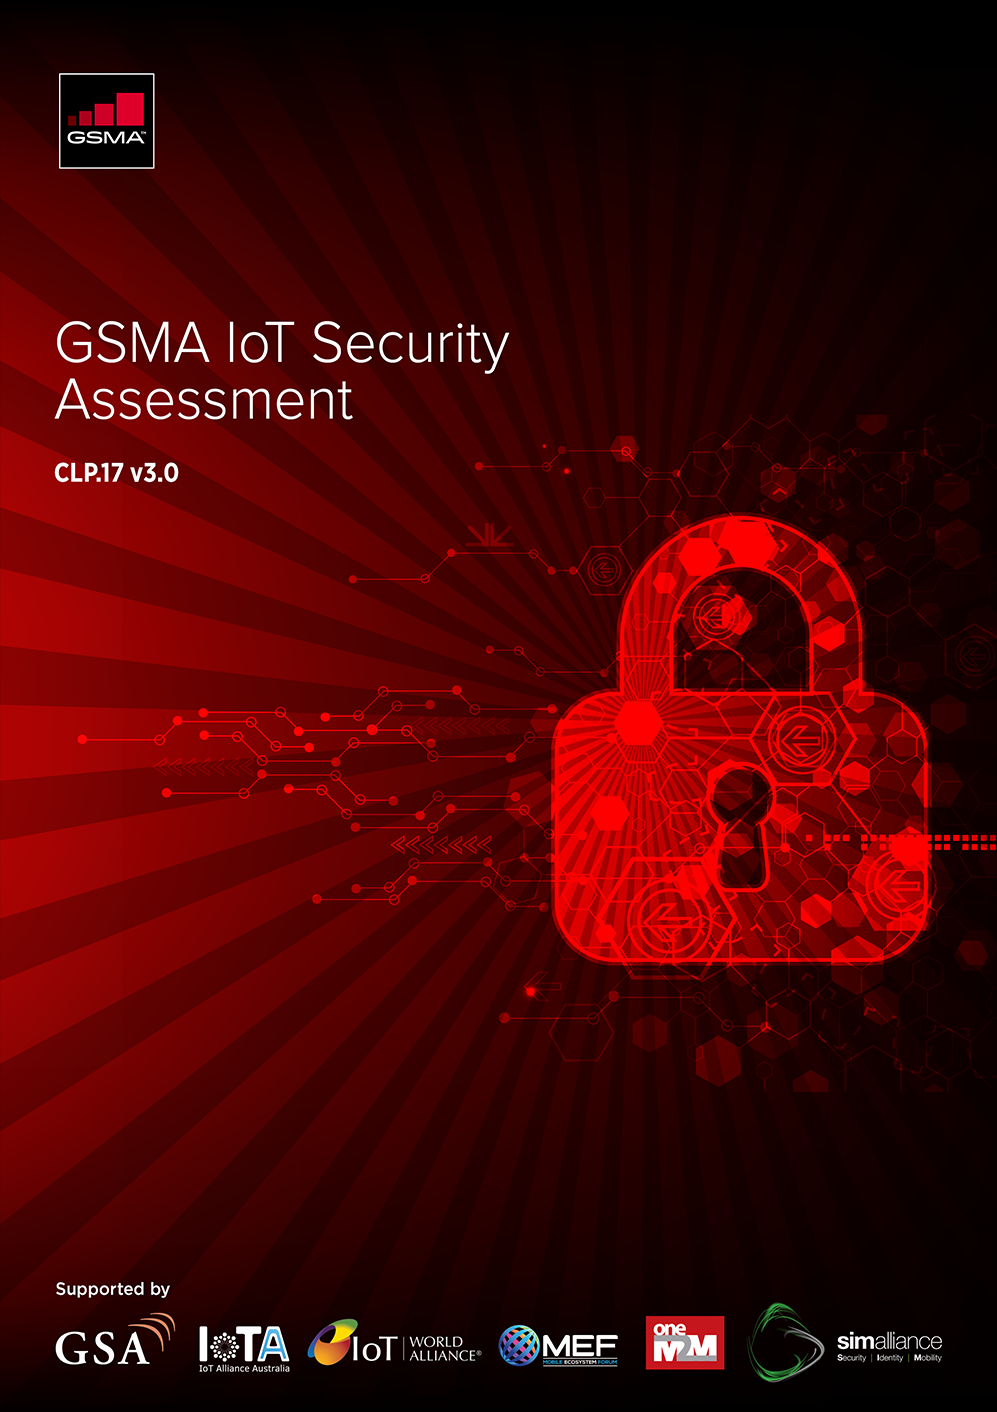 GSMA IoT Security Guidelines and Assessment – Japanese image